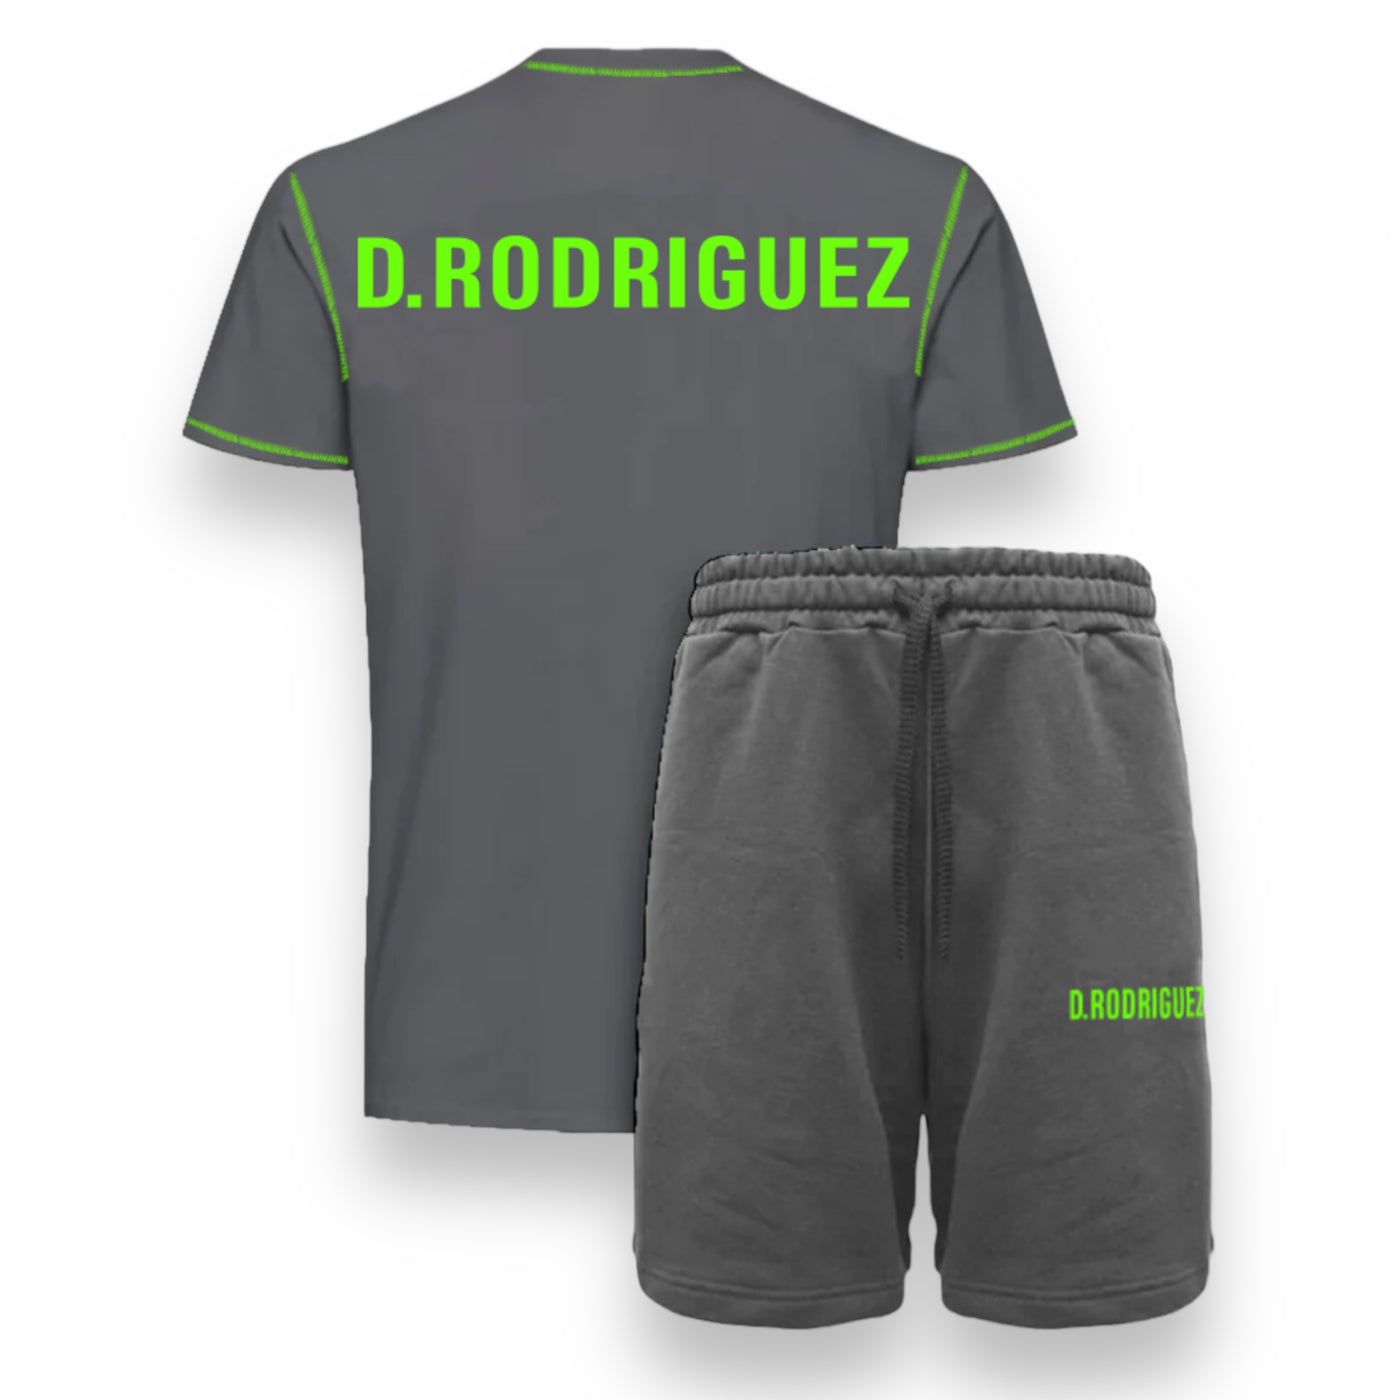 Diego Rodriguez outfit Glossy band